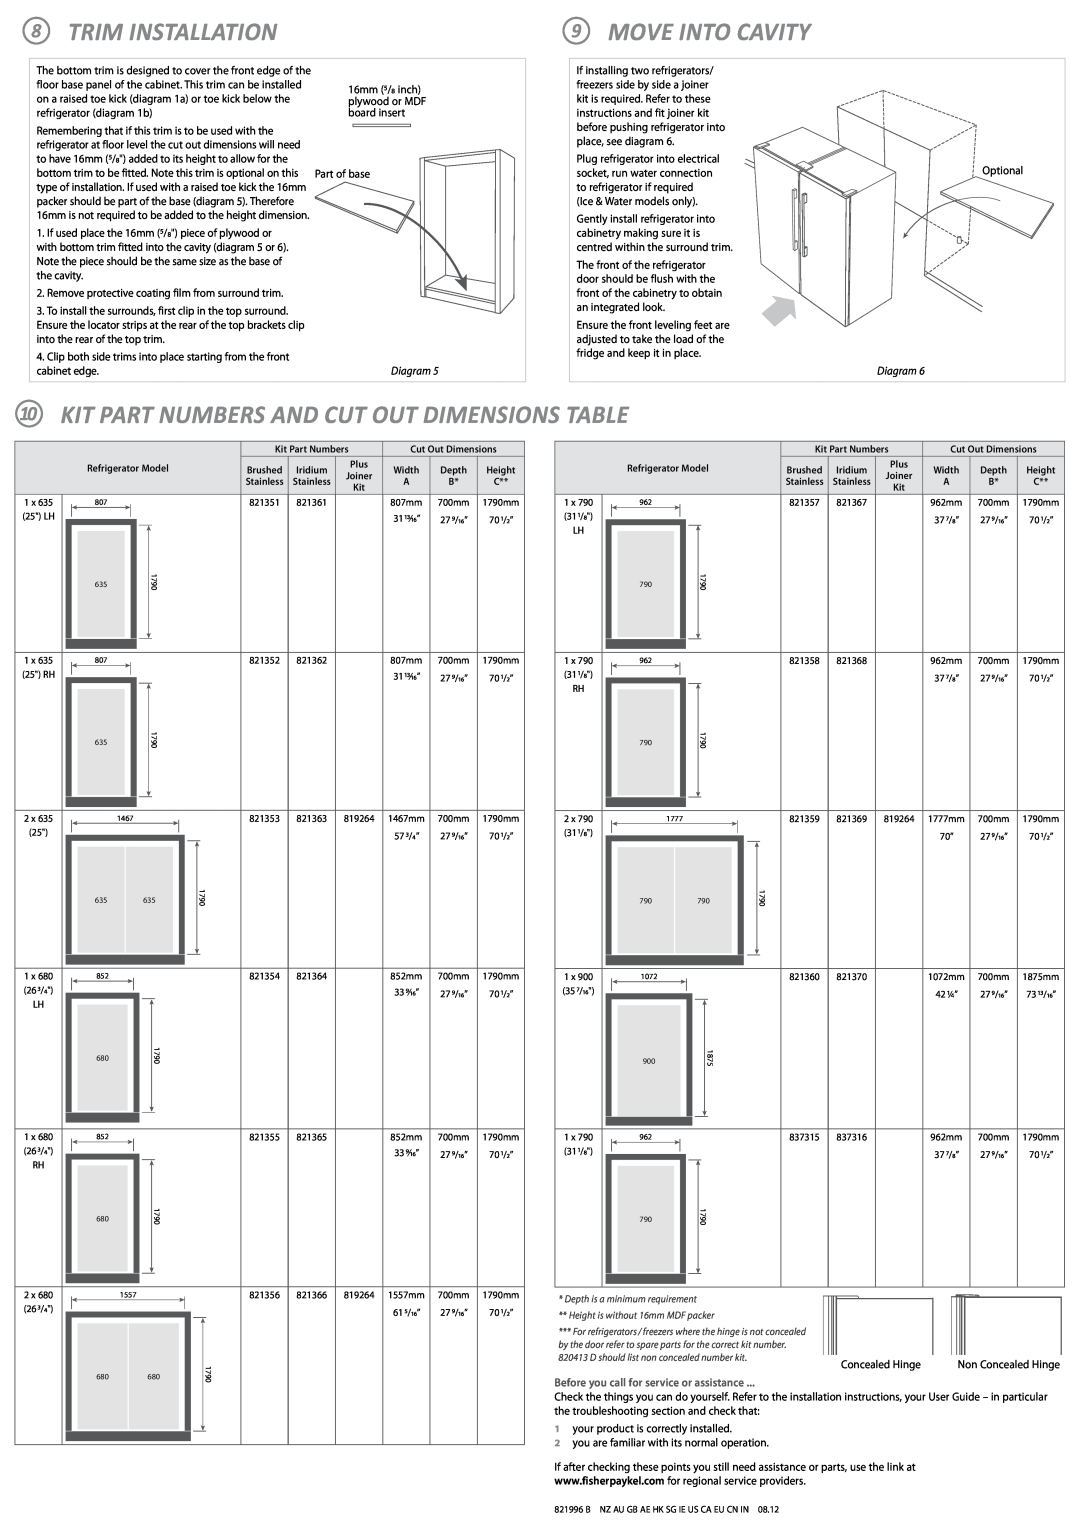 Fisher & Paykel RF540 8TRIM INSTALLATION, 9MOVE INTO CAVITY, 10Kit part numbers and cut out dimensions table, Diagram 